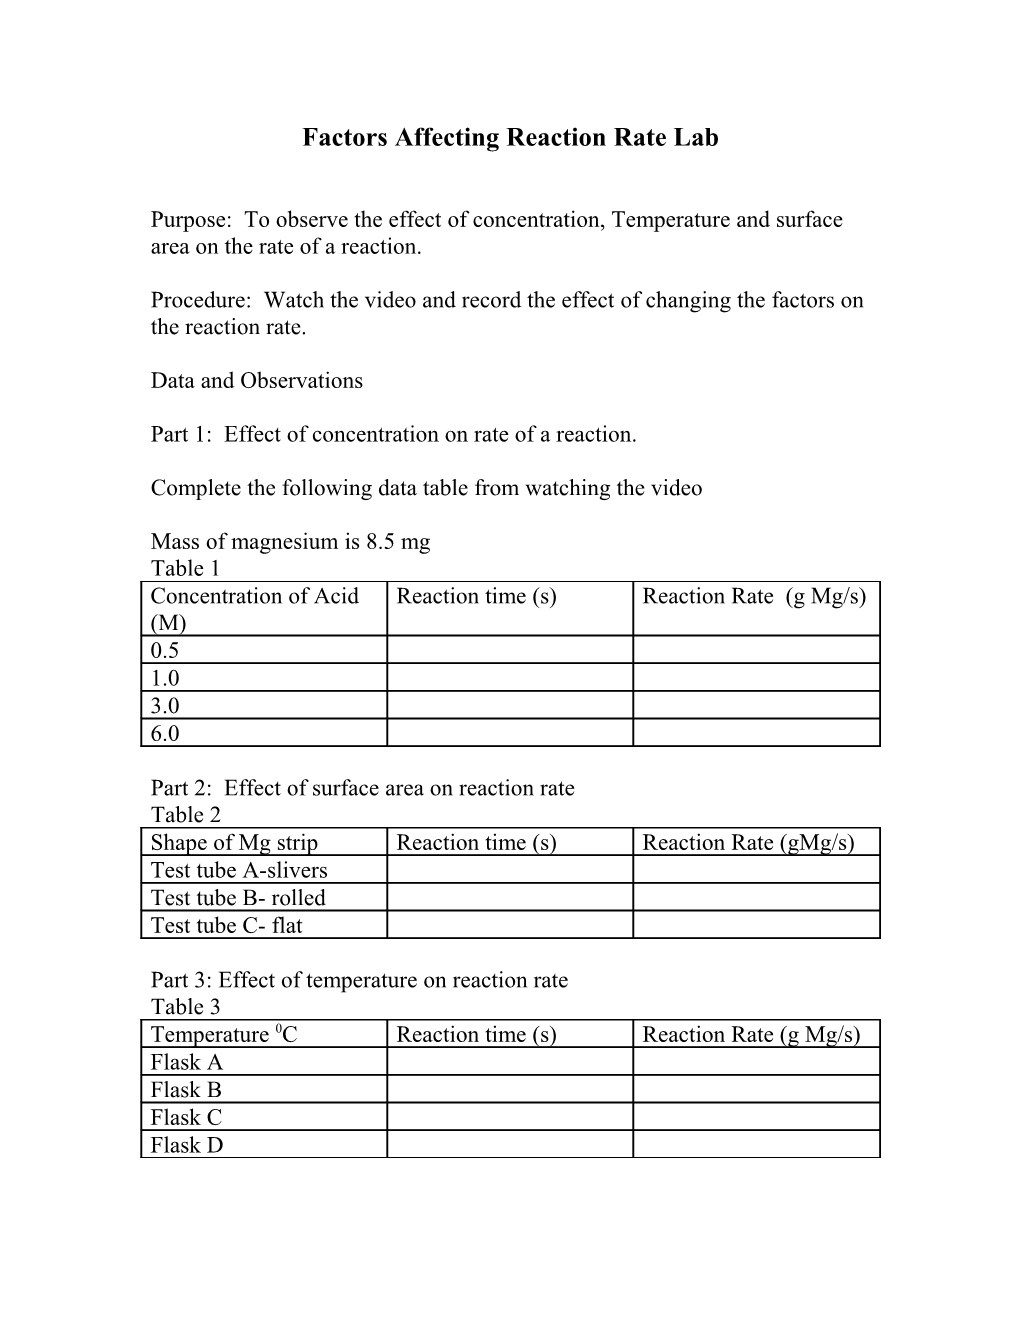 Effects of Concentration, Temperature and Surface Area on Rates of Reactions